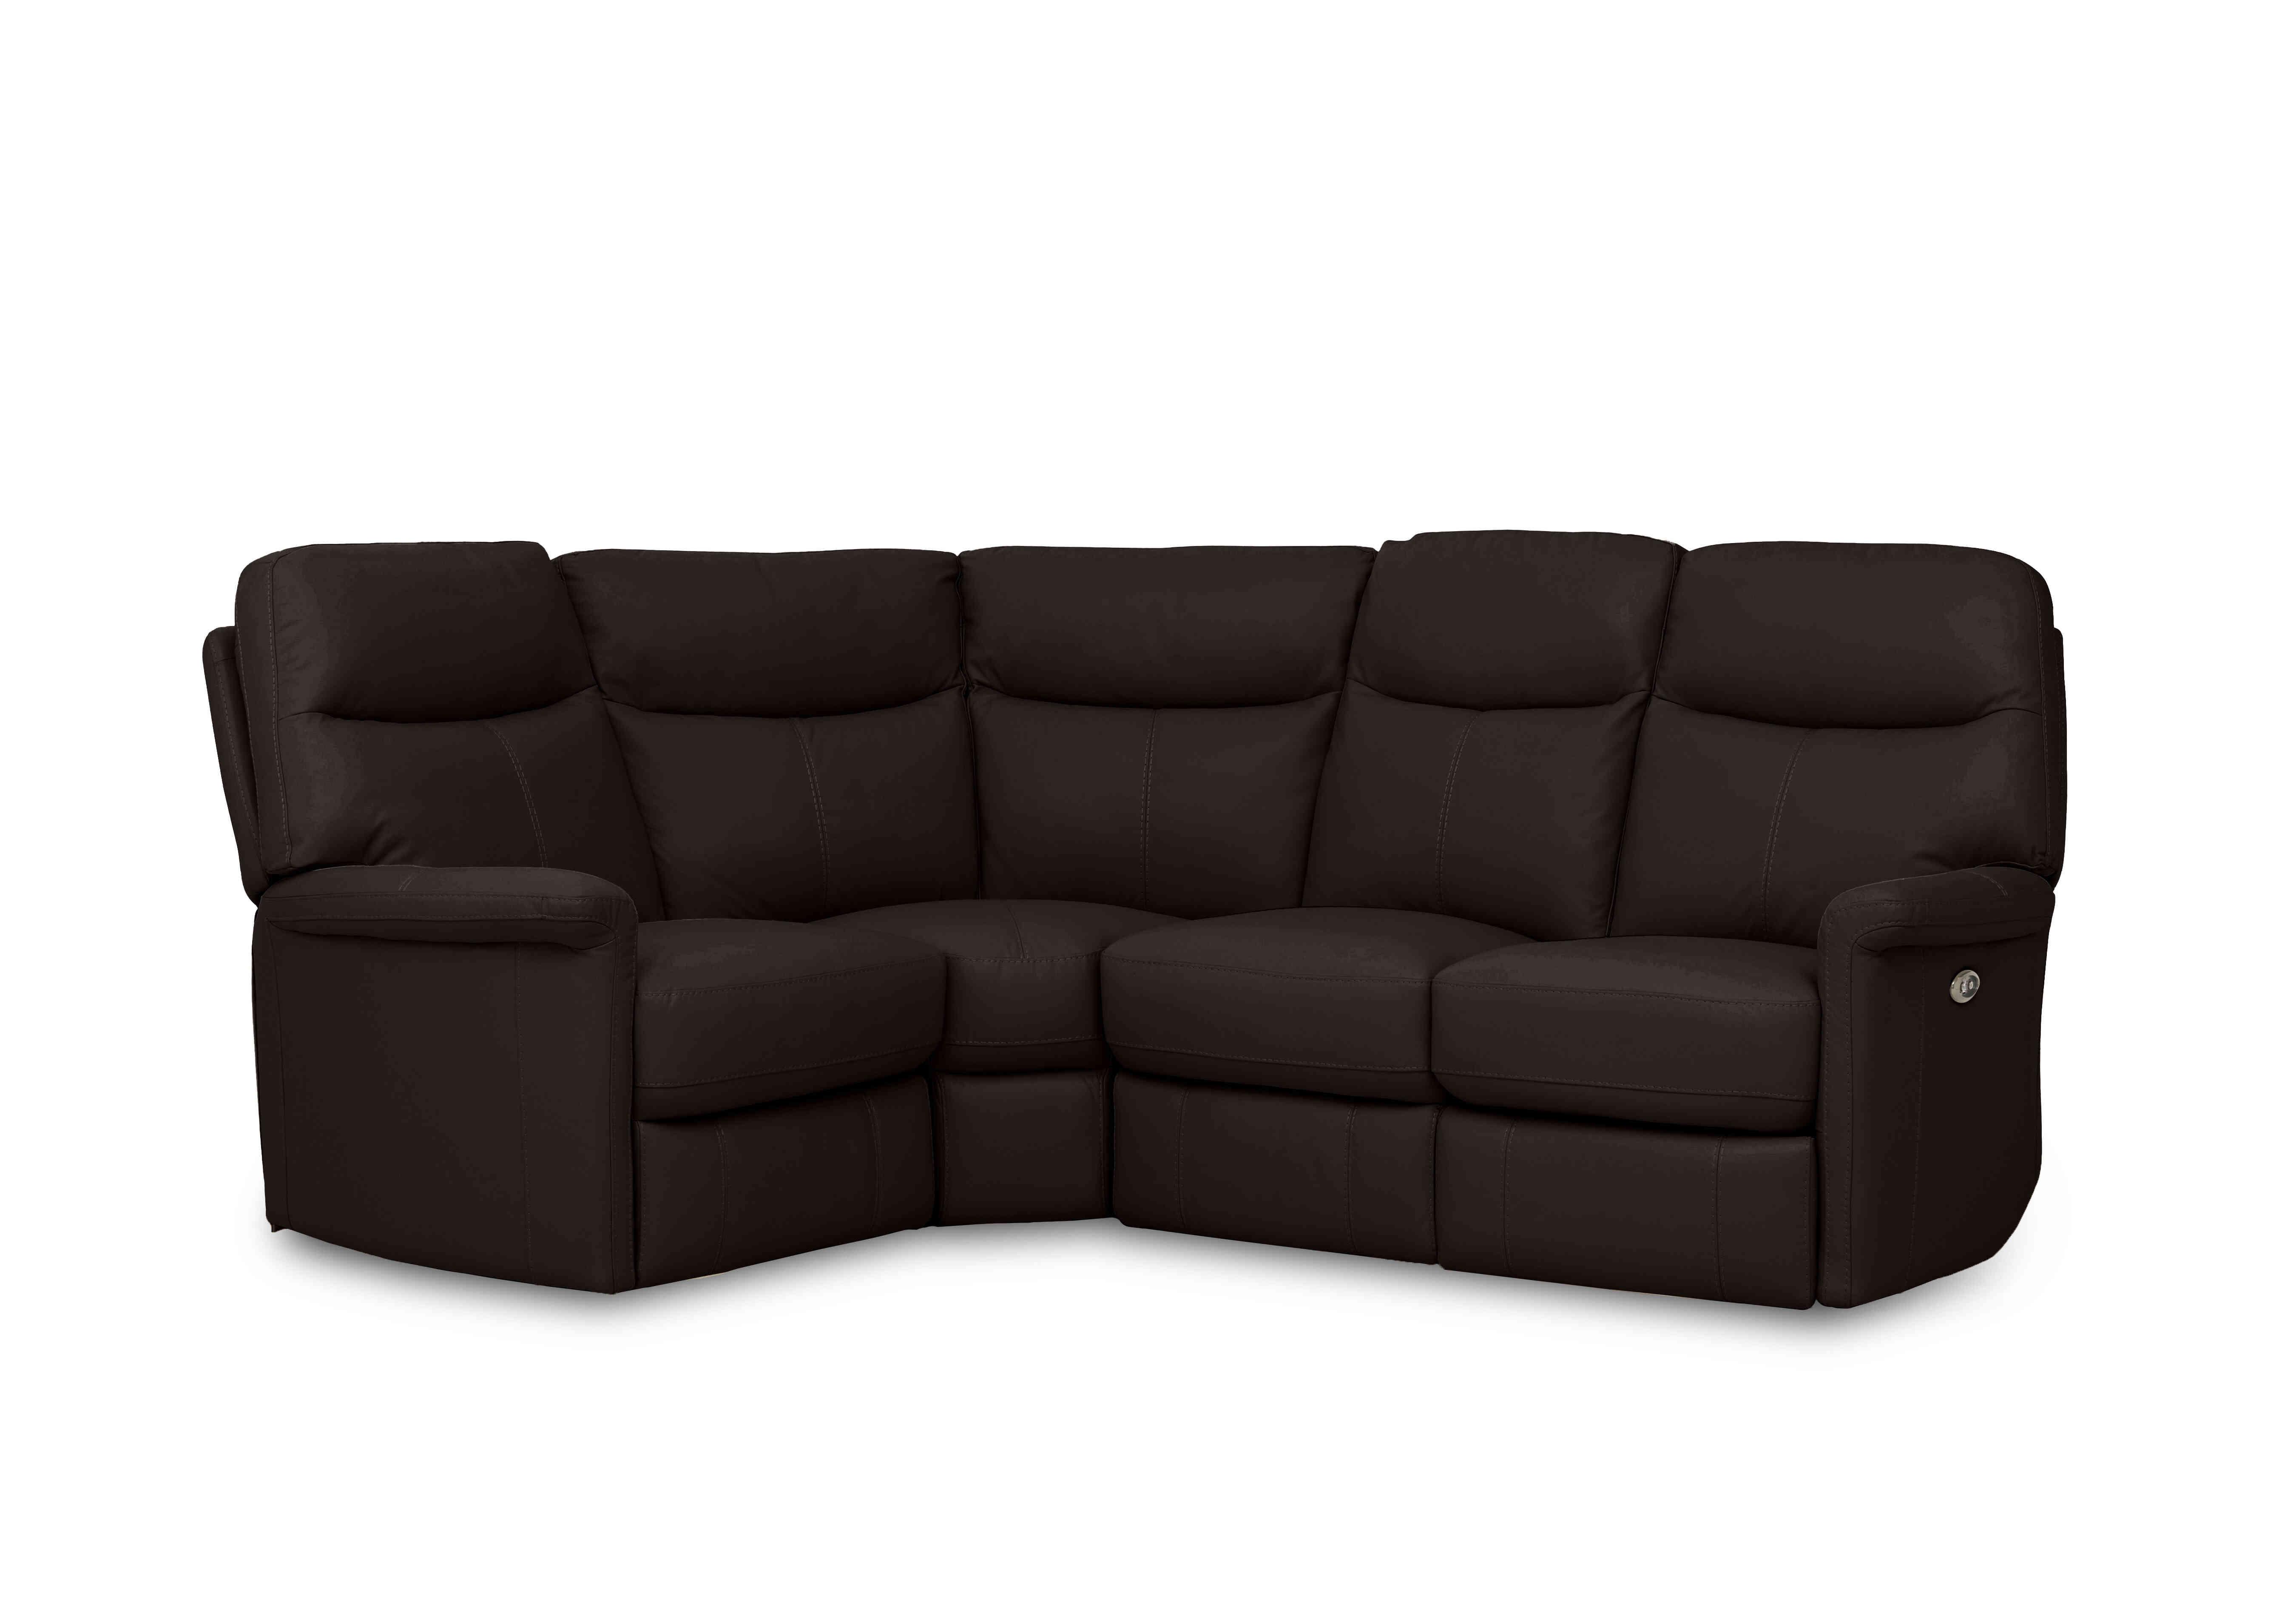 Compact Collection Lille Leather Corner Sofa in Bv-1748 Dark Chocolate on Furniture Village